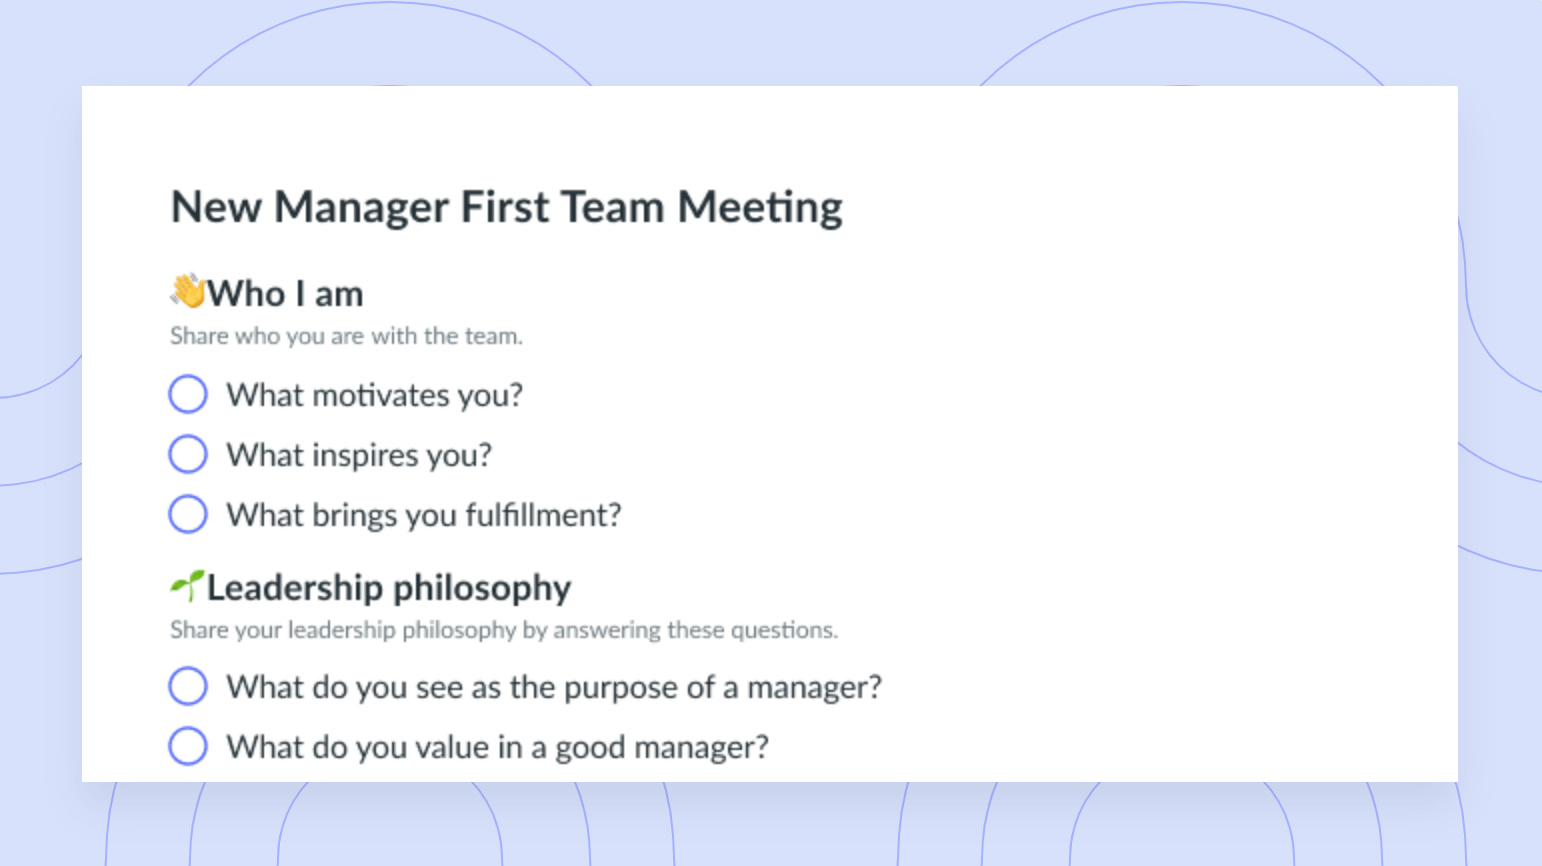 New Manager First Team Meeting Template